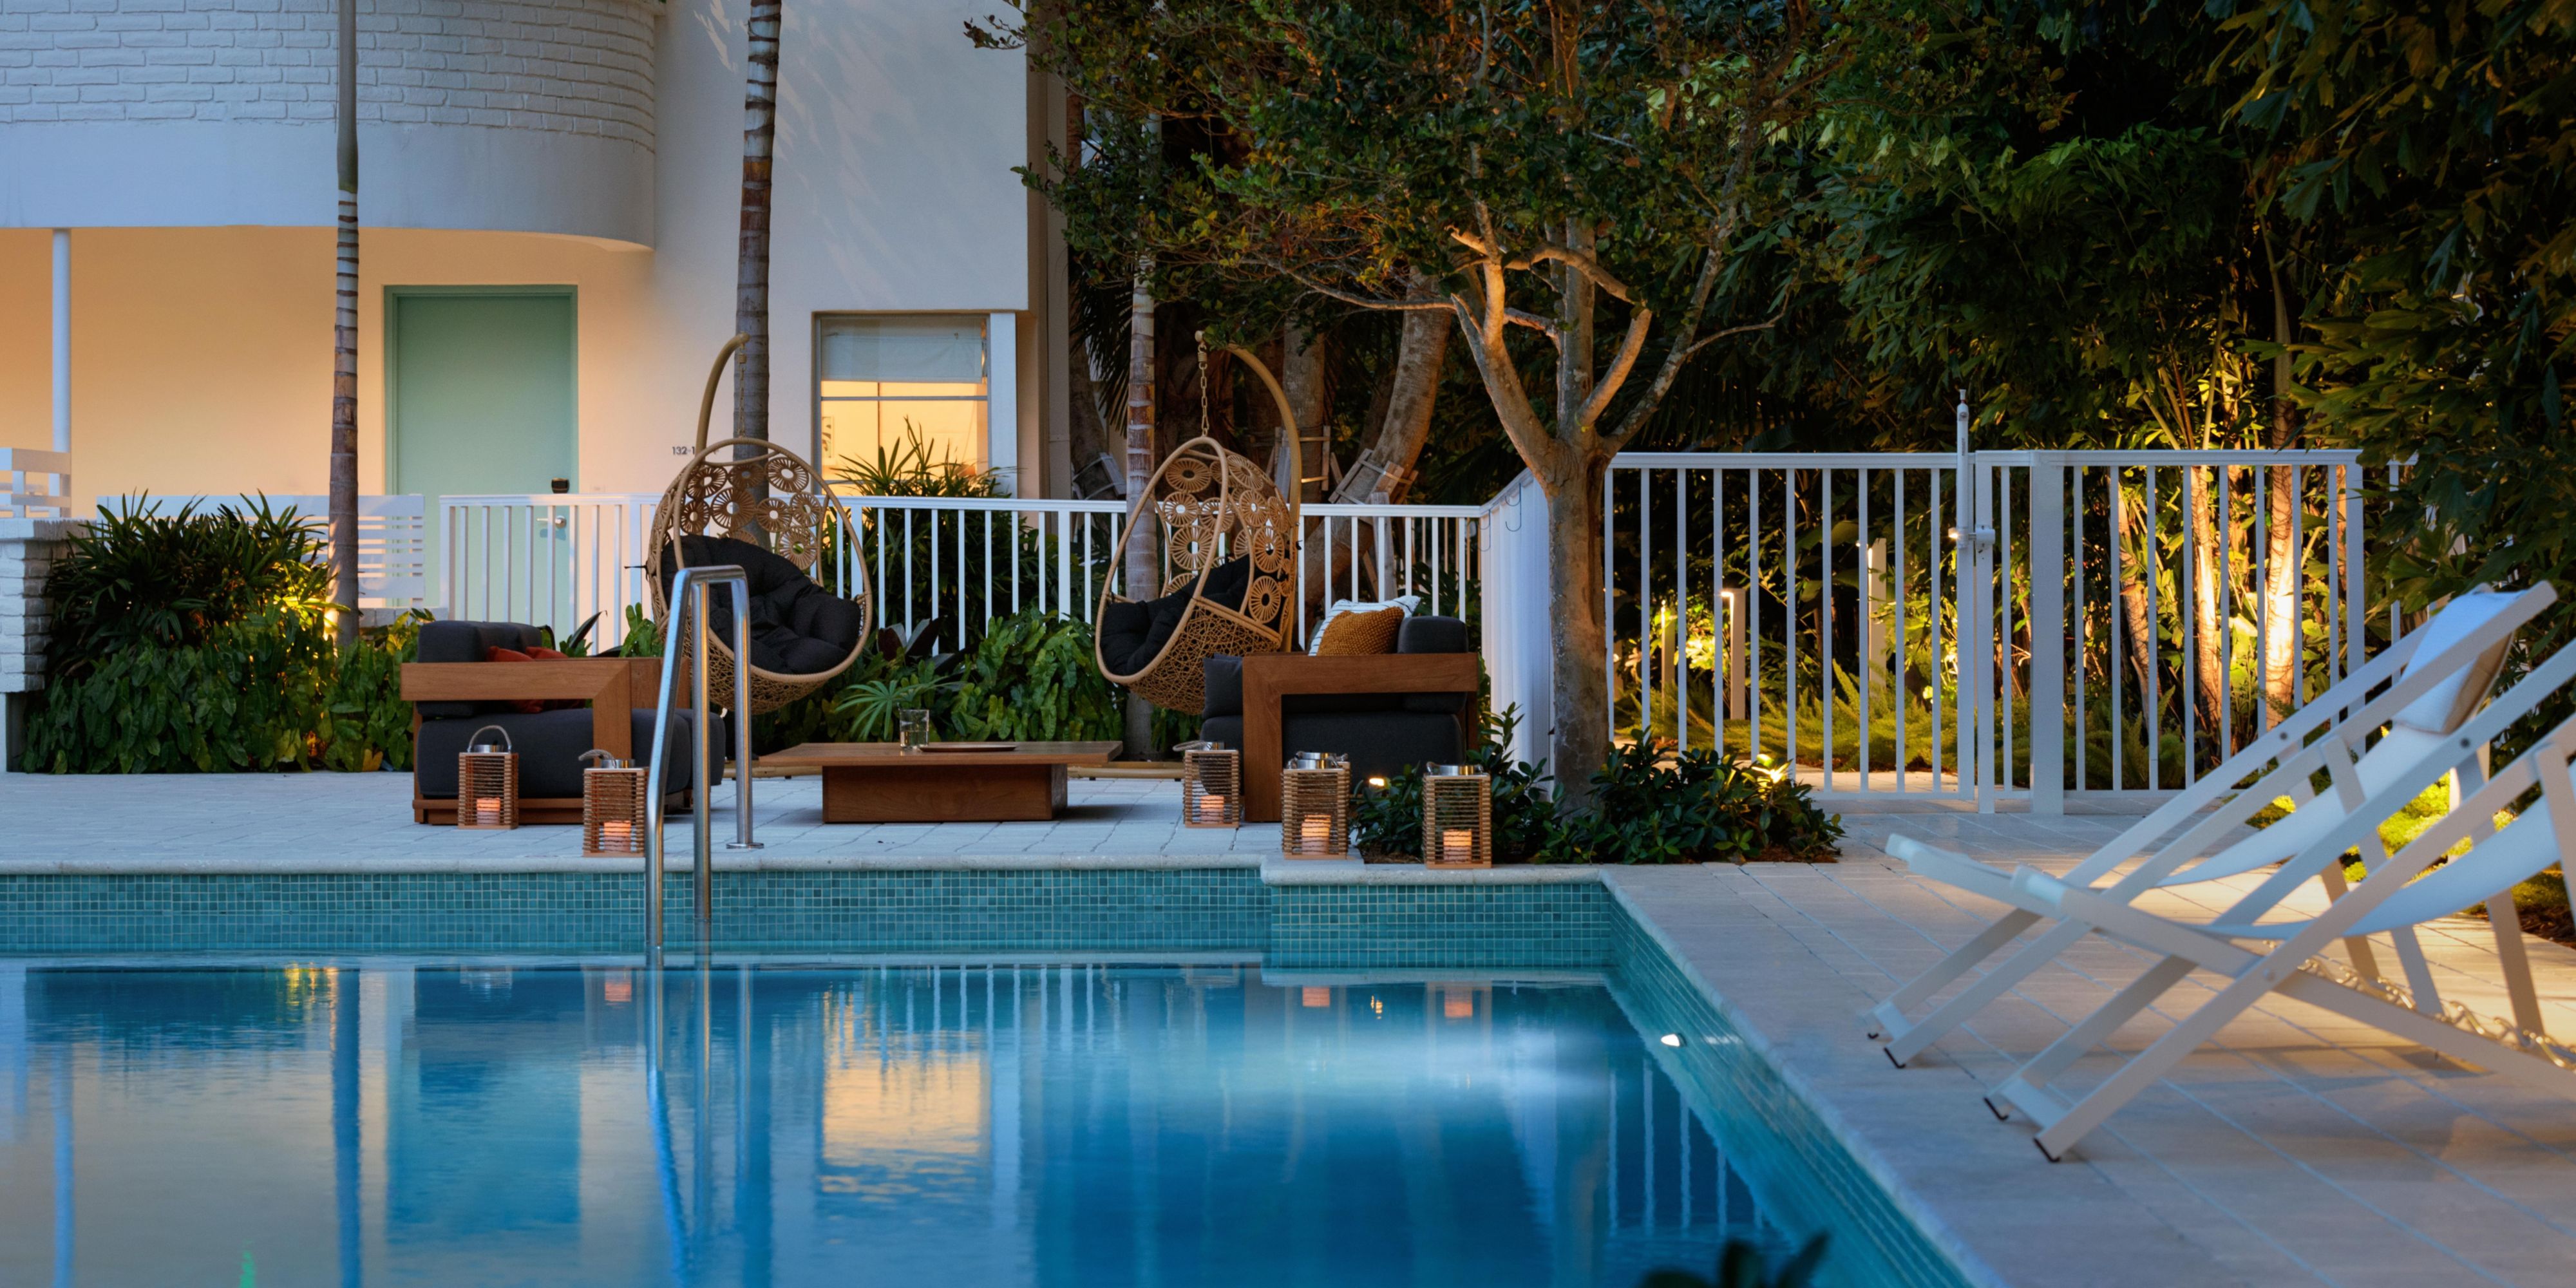 Find a lively social scene and seclusion from the world outside at the courtyard pool. 